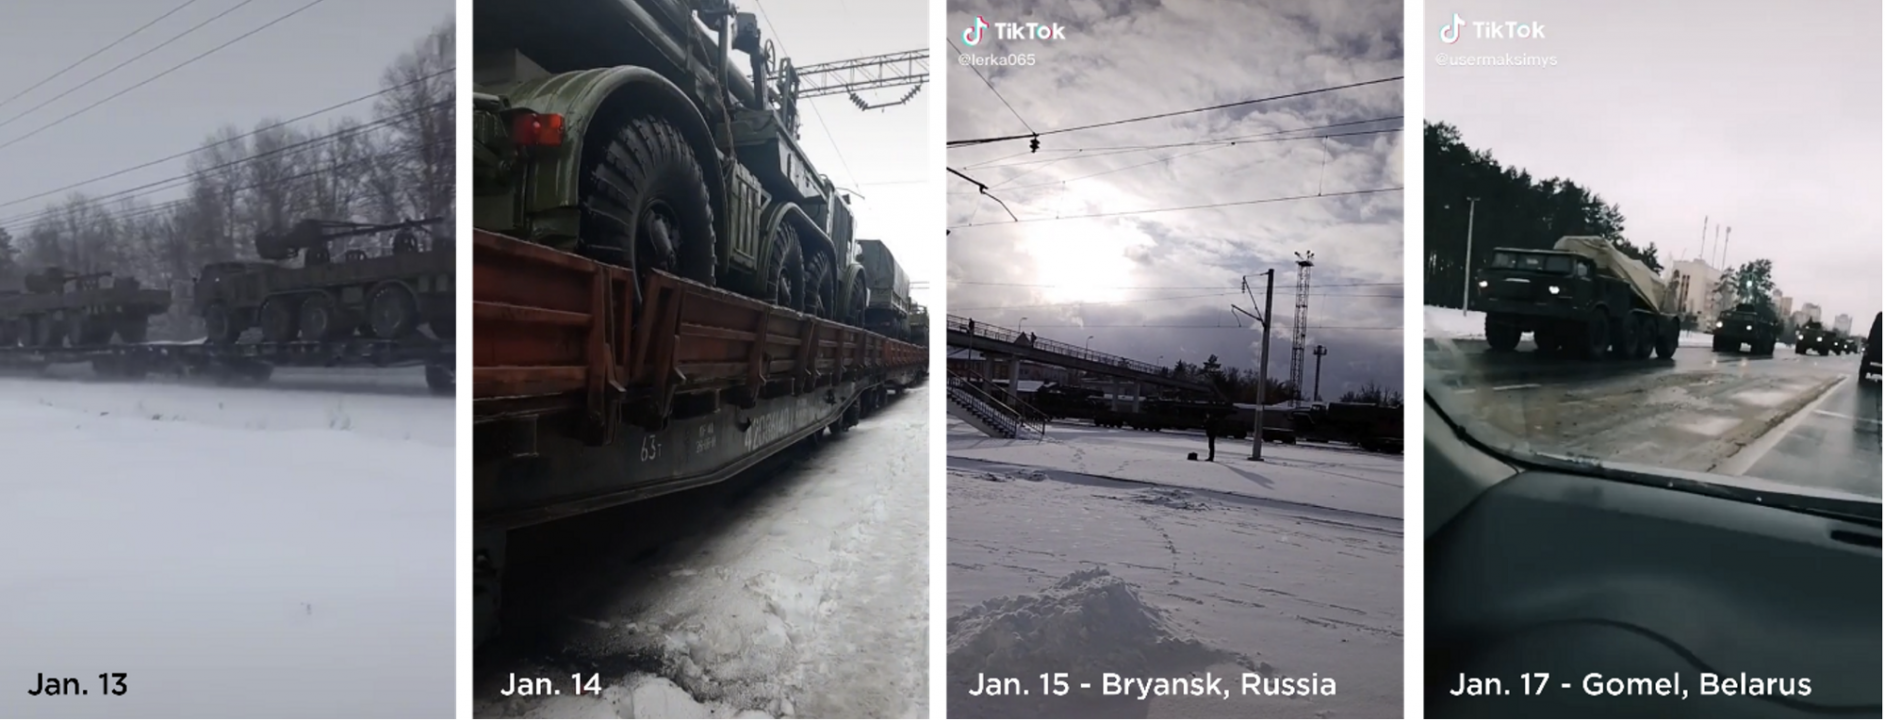 Screenshots of TikTok videos showing the convoy moving through Russia.